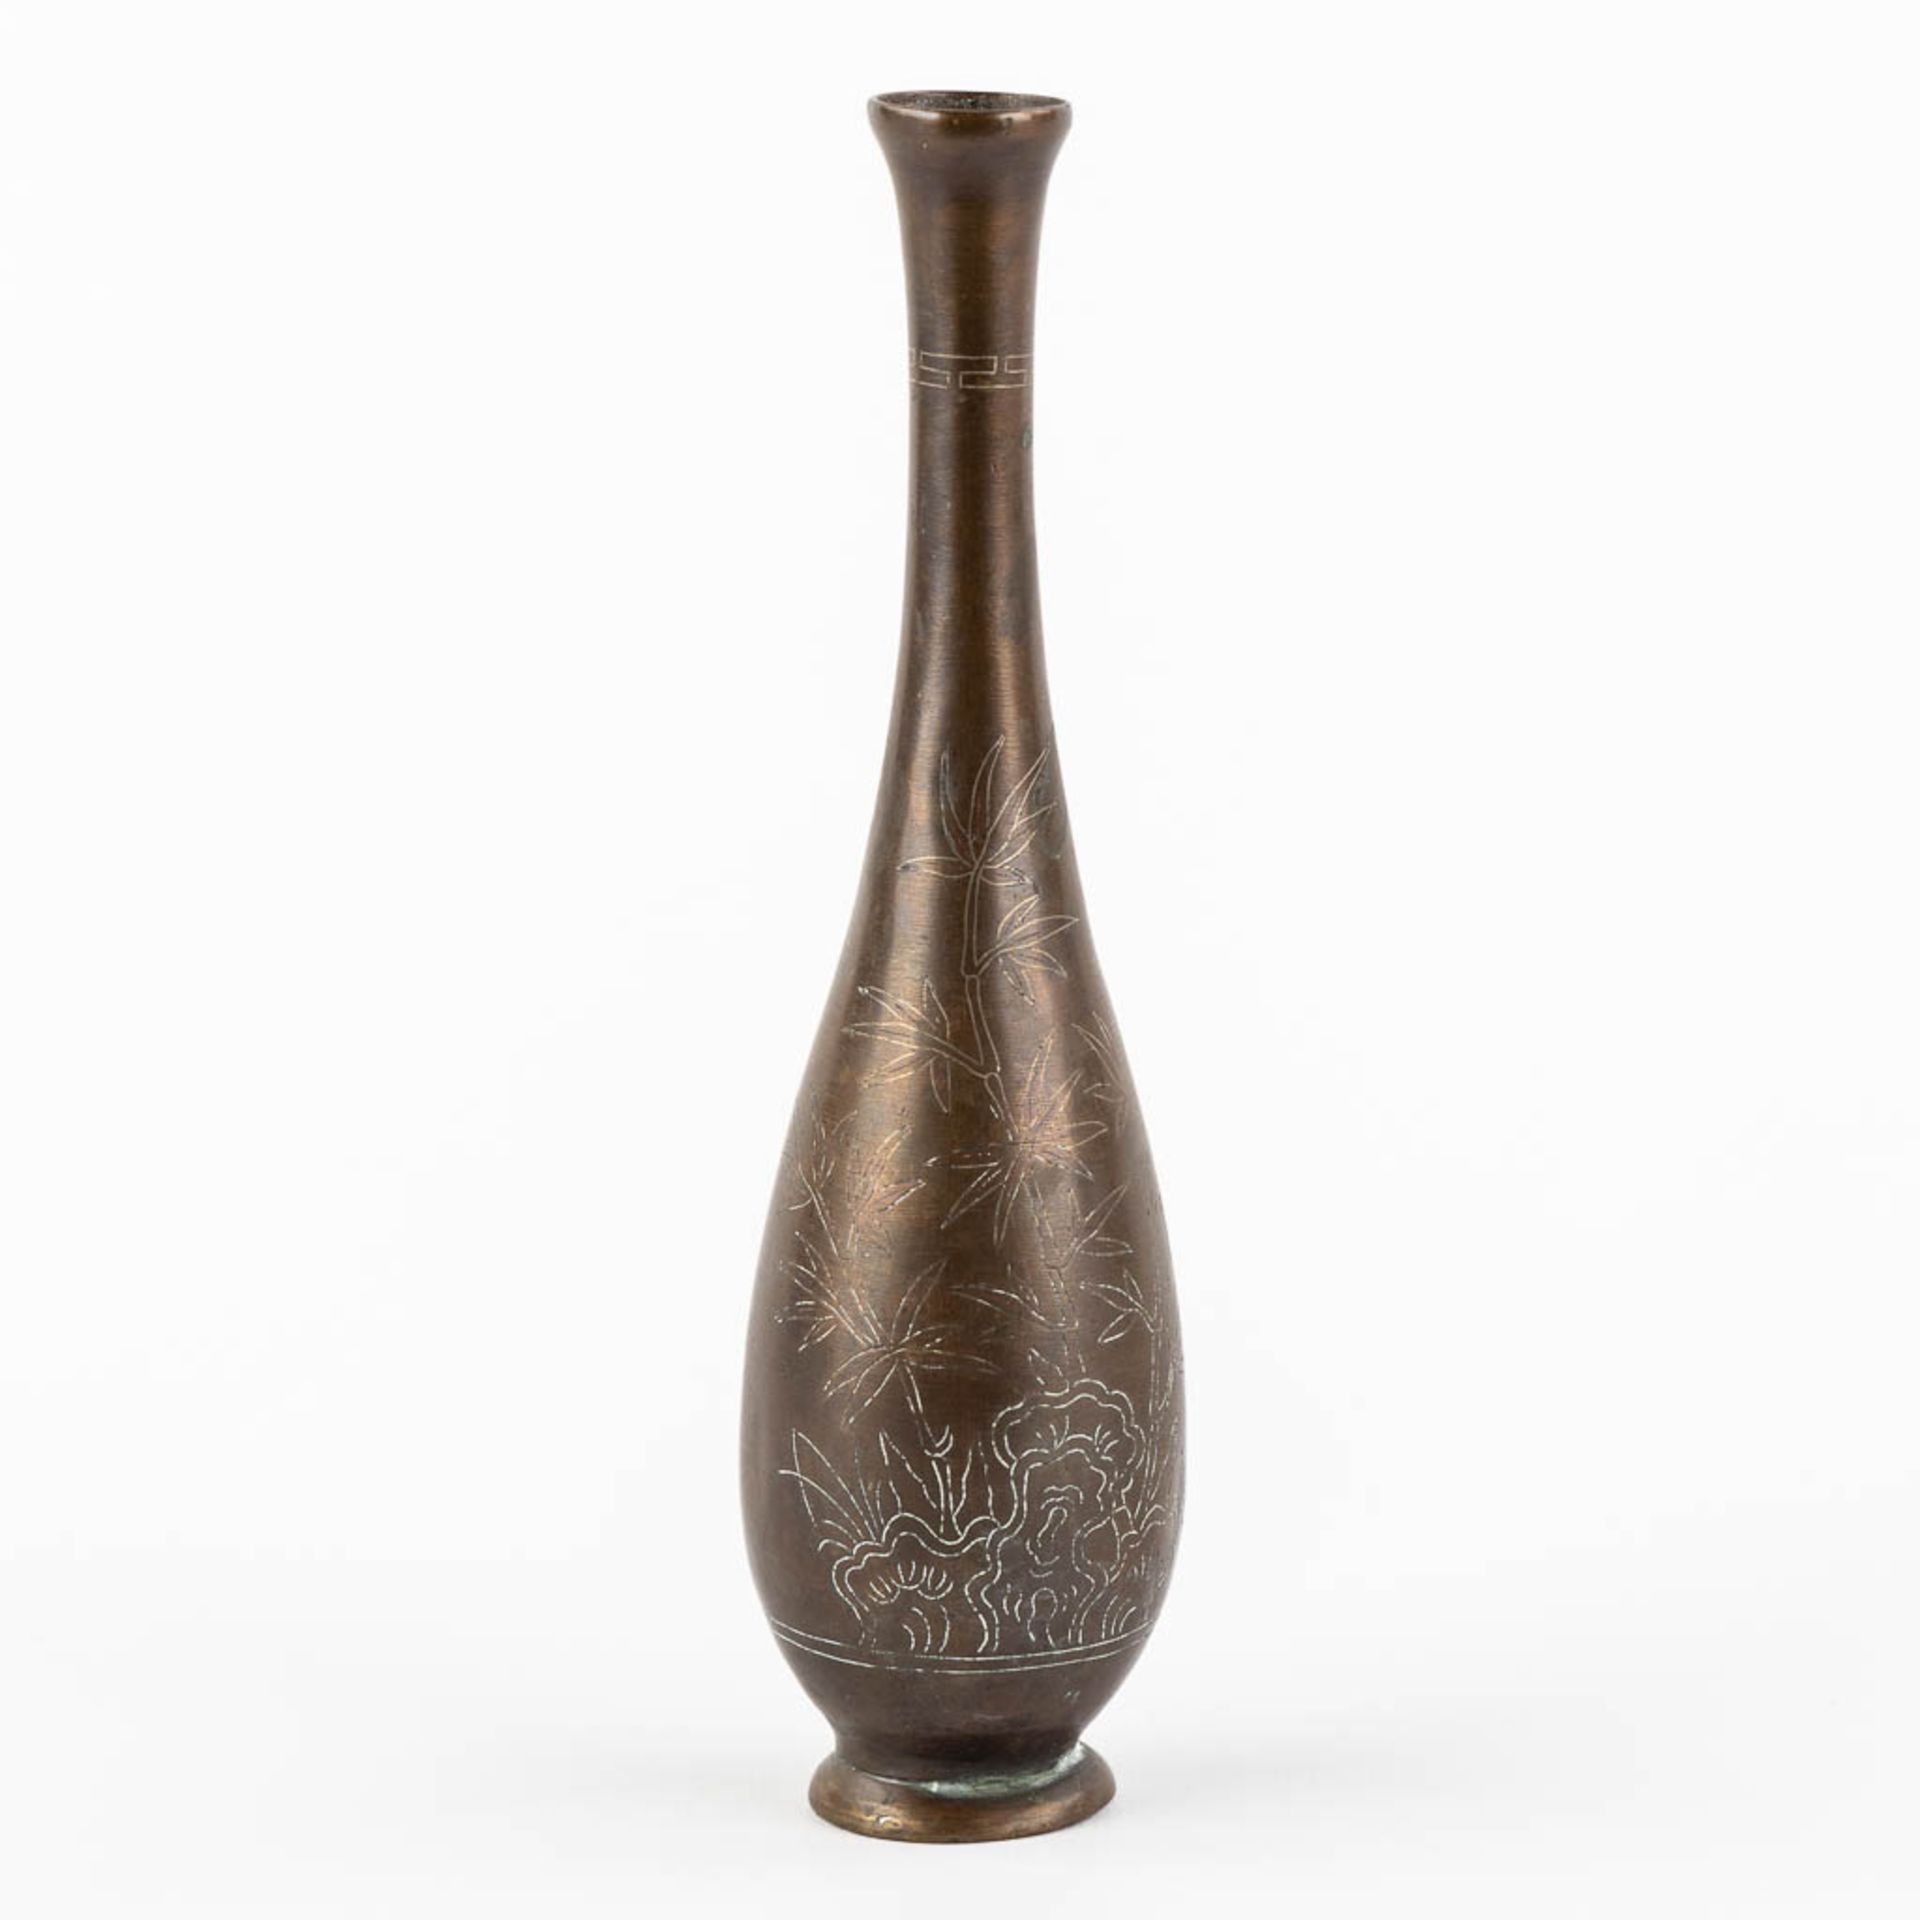 A Chinese insence burner, vase and a lucky coin. Bronze. (H:19 x D:5 cm) - Image 3 of 19